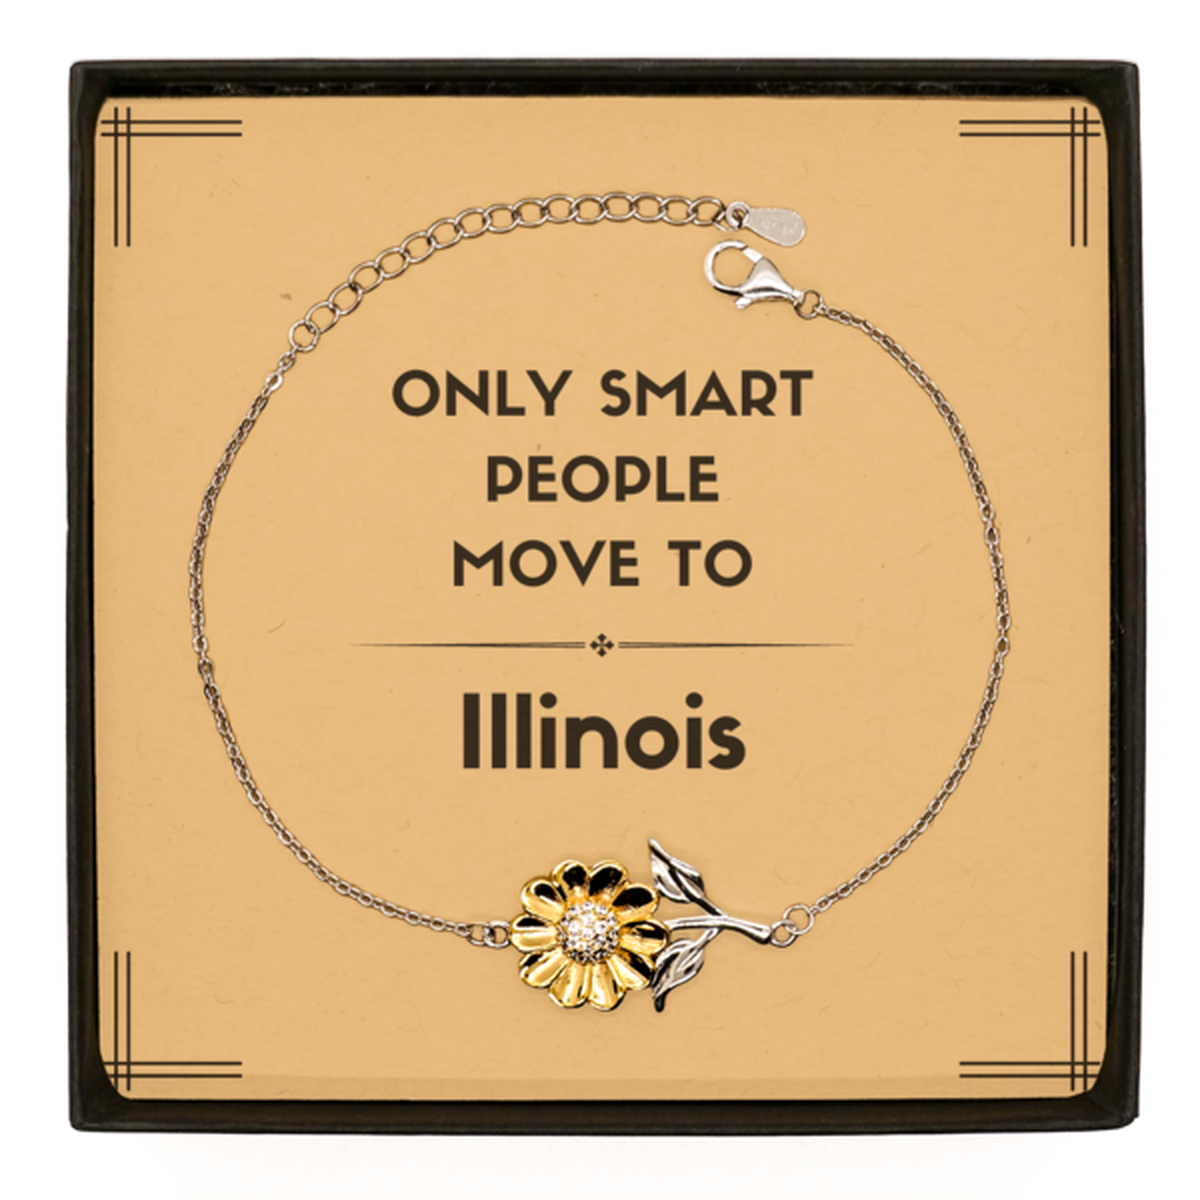 Only smart people move to Illinois Sunflower Bracelet, Message Card Gifts For Illinois, Move to Illinois Gifts for Friends Coworker Funny Saying Quote